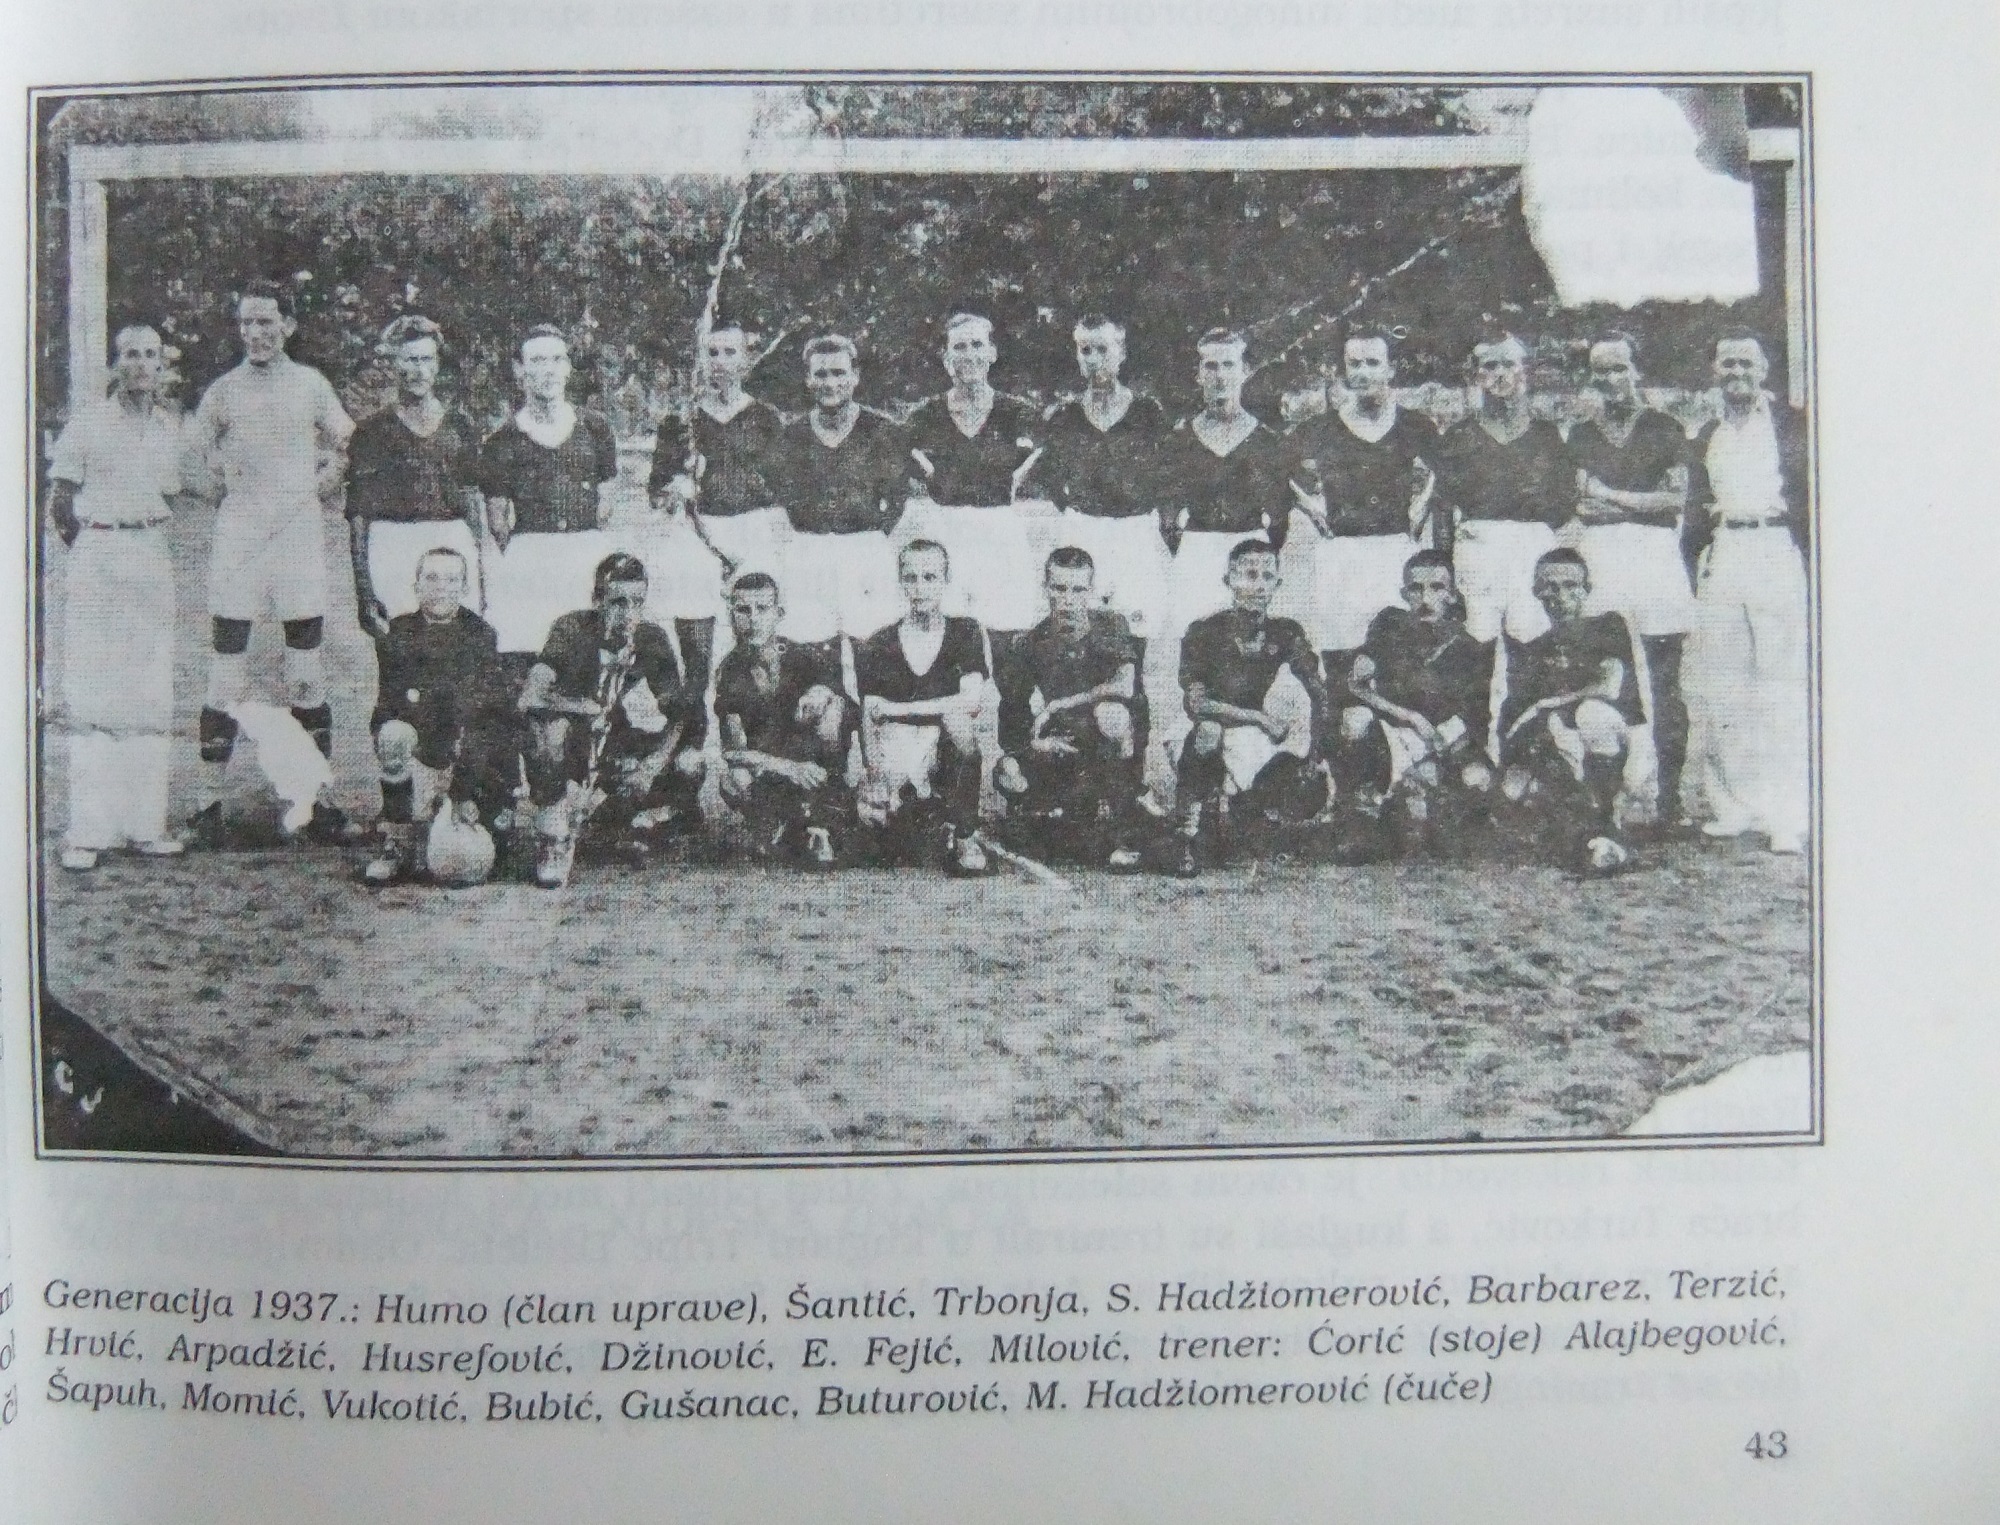  FC "Velež", photographed in 1937. Mehmed Šapuh is crouching second from the left.